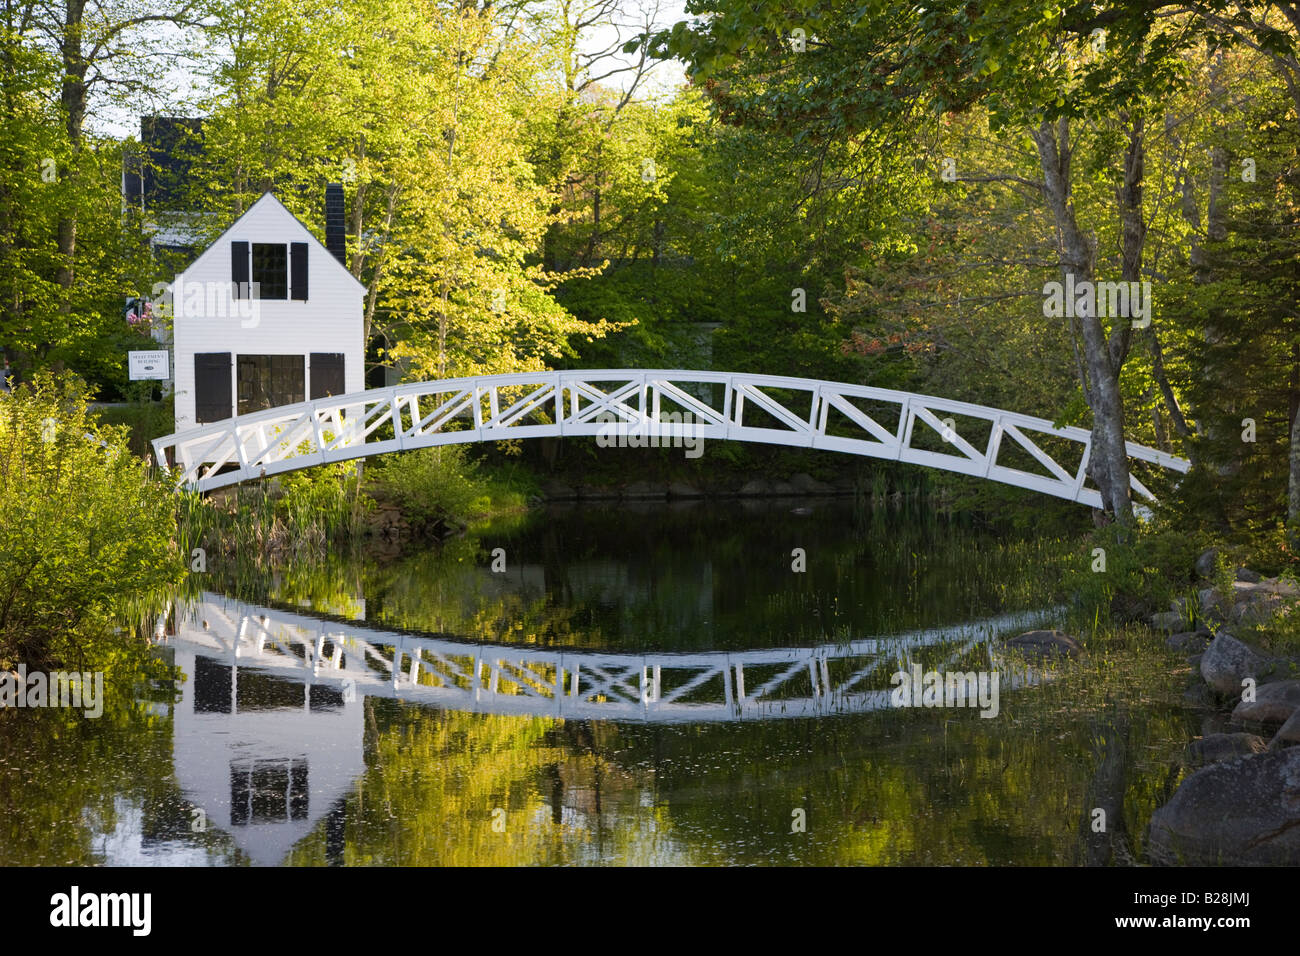 Wooden foot bridge over a pond, Somesville, ME Stock Photo